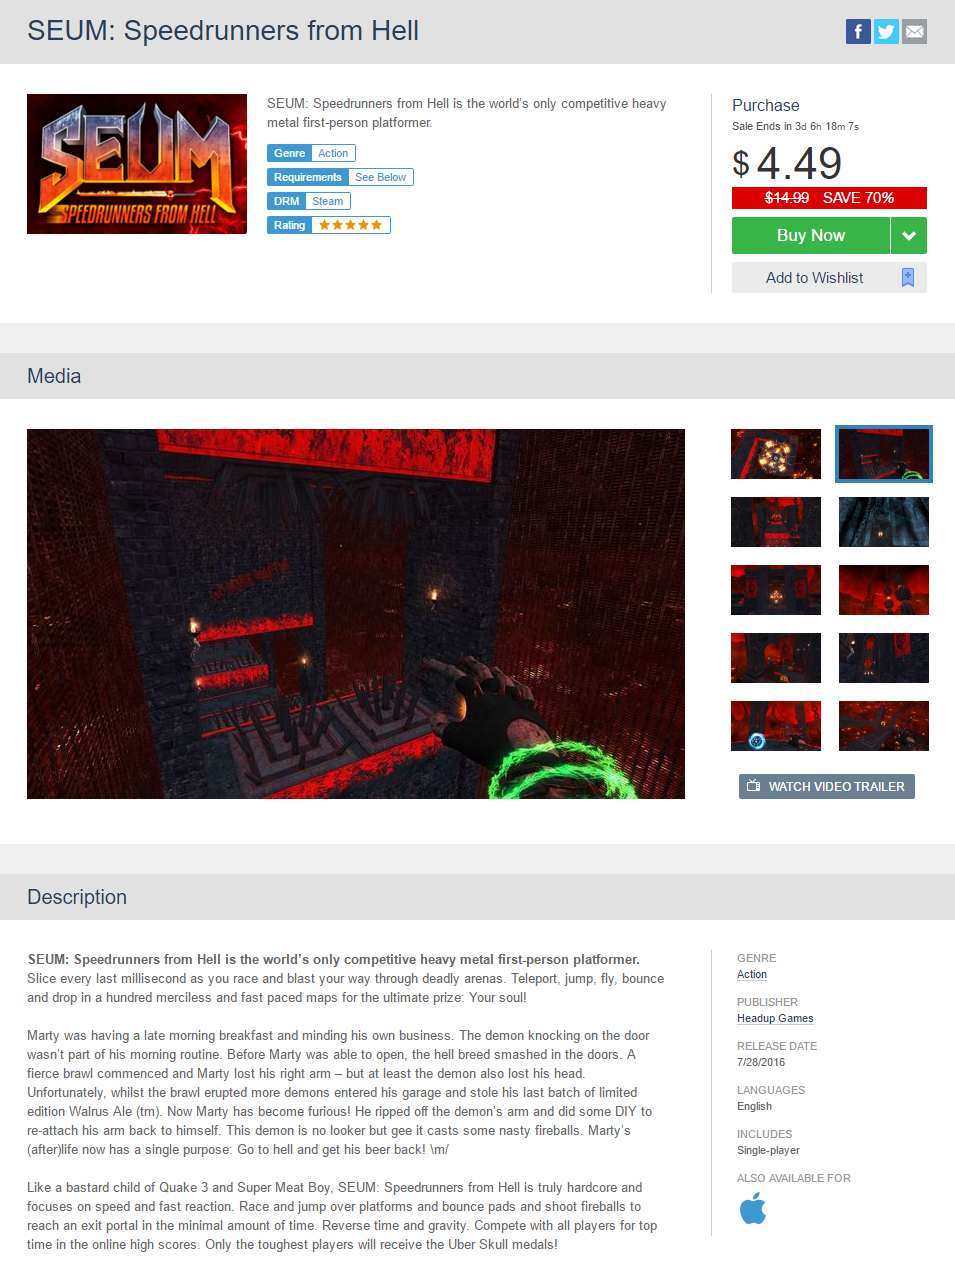 screencapture-wingamestore-product-5982-SEUM-Speedrunners-from-Hell-1487900510715.png